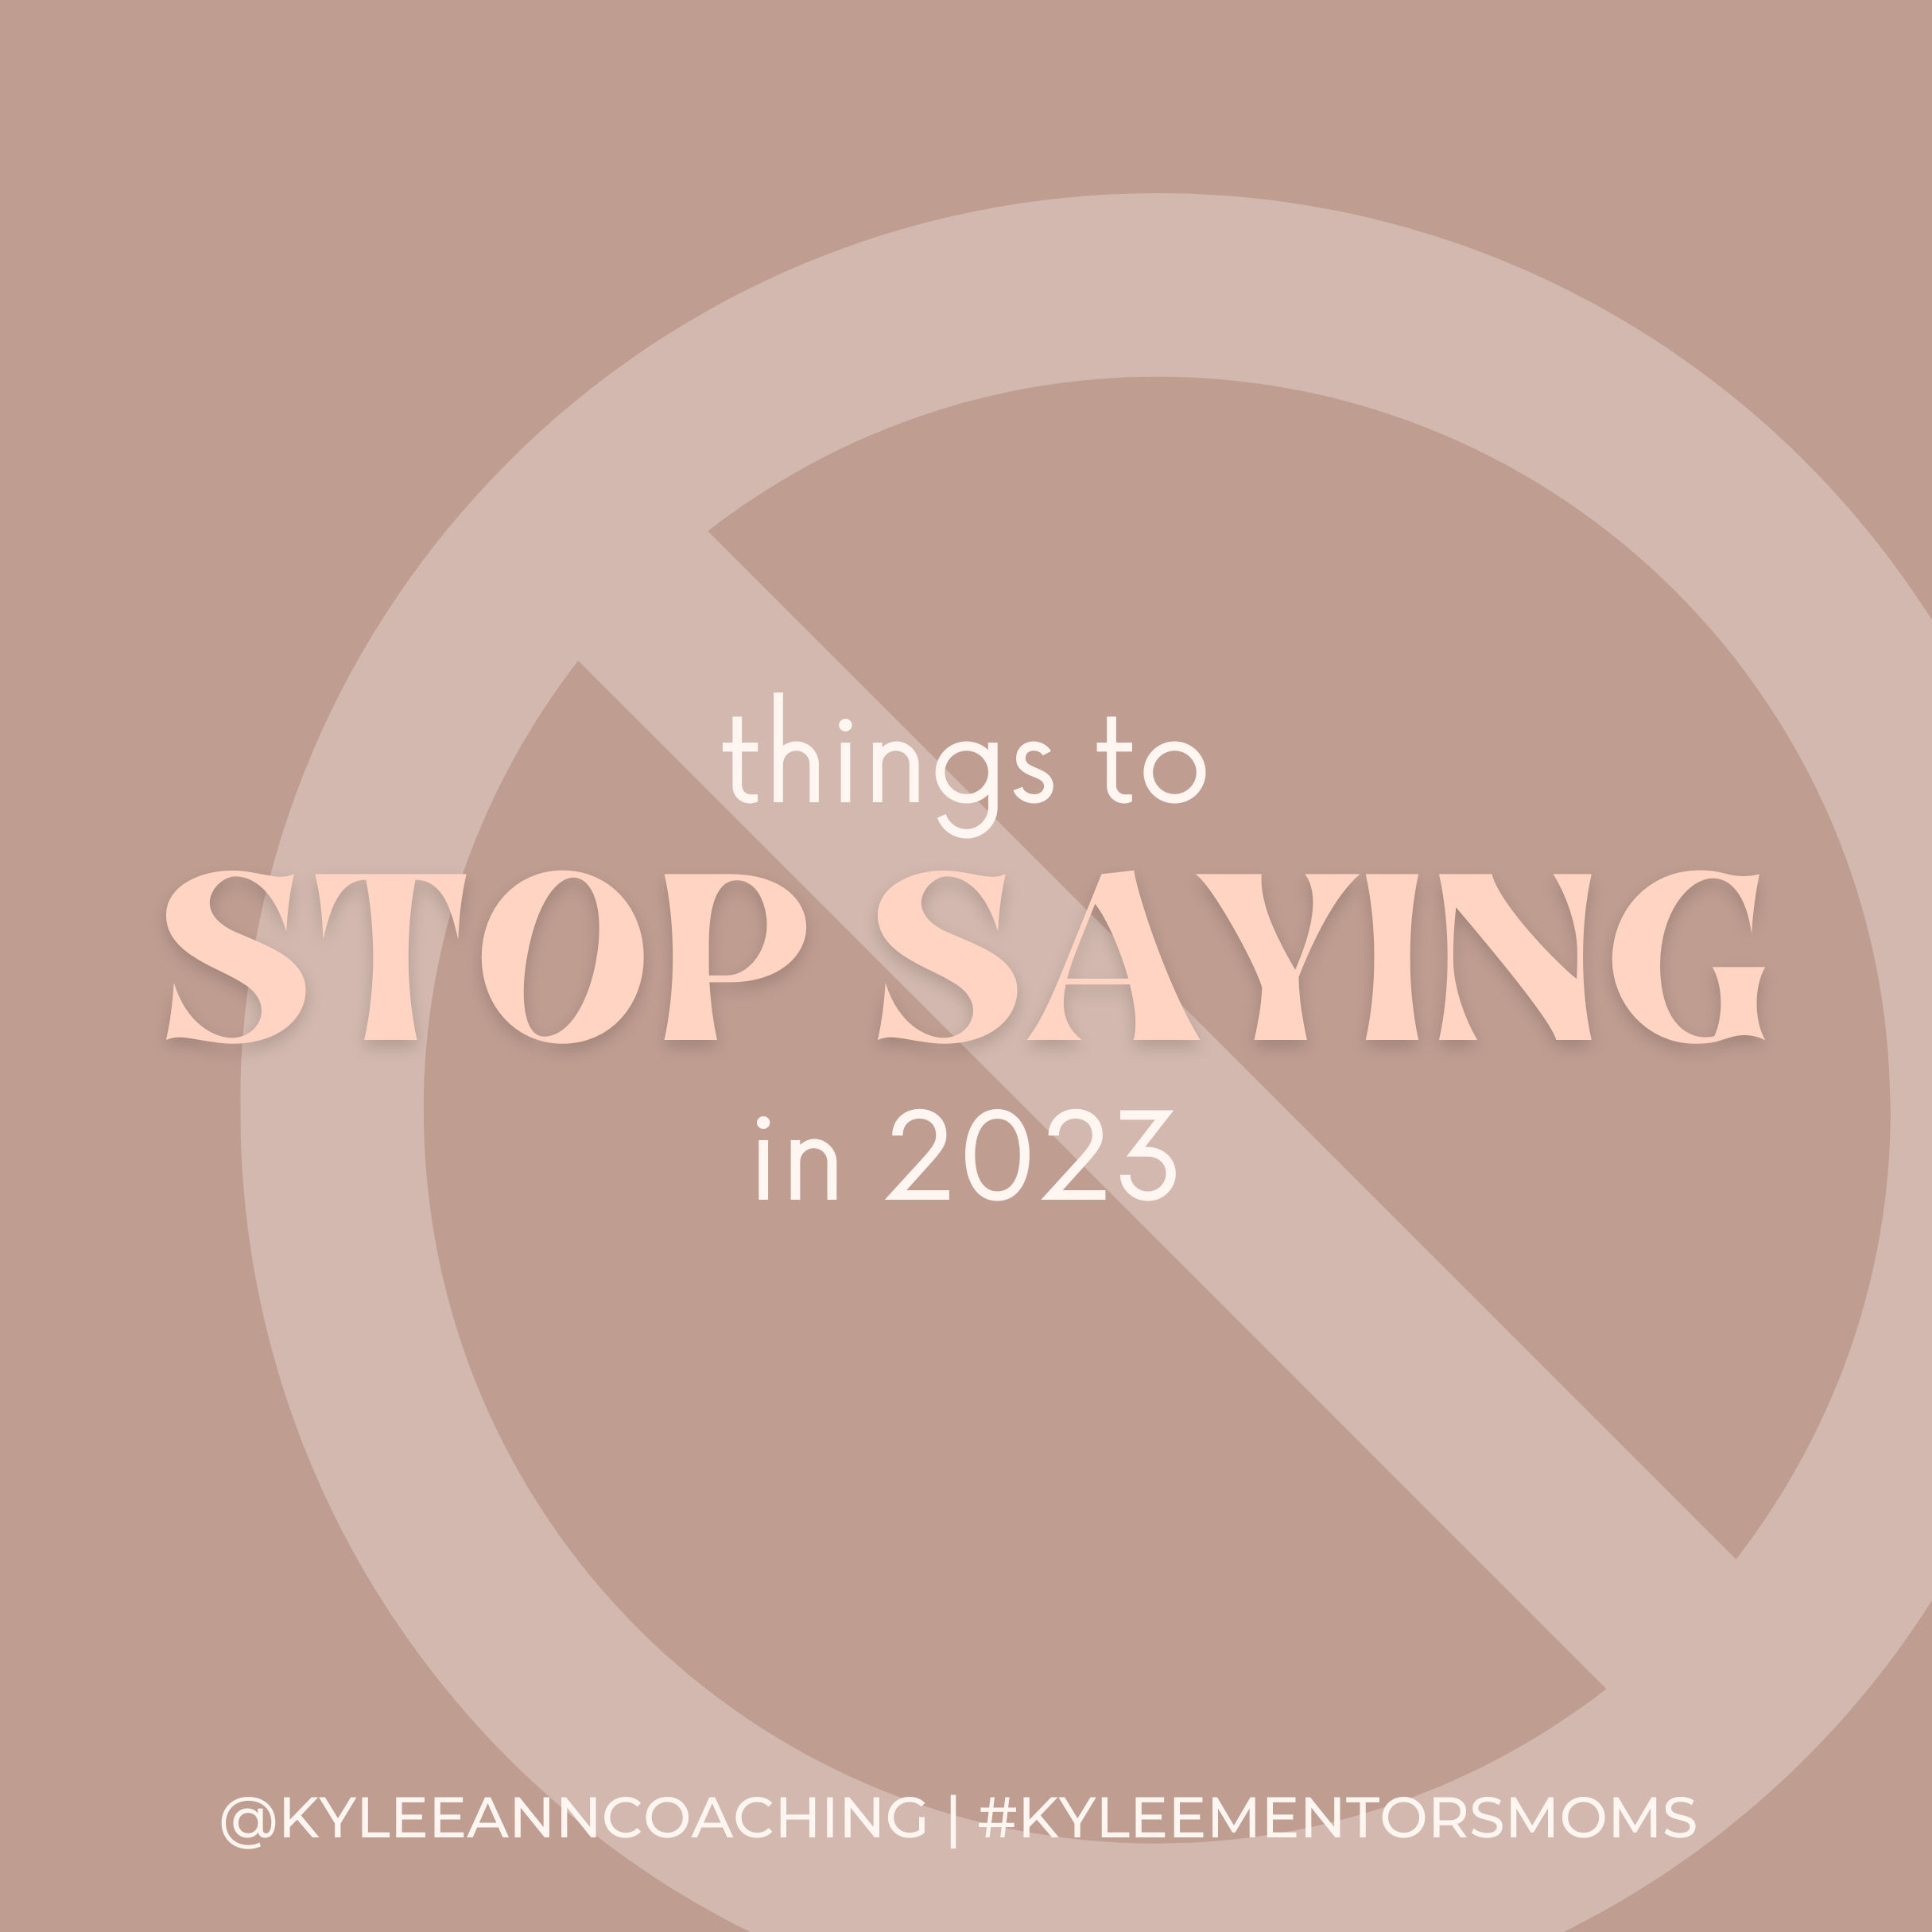 Things to Stop Saying